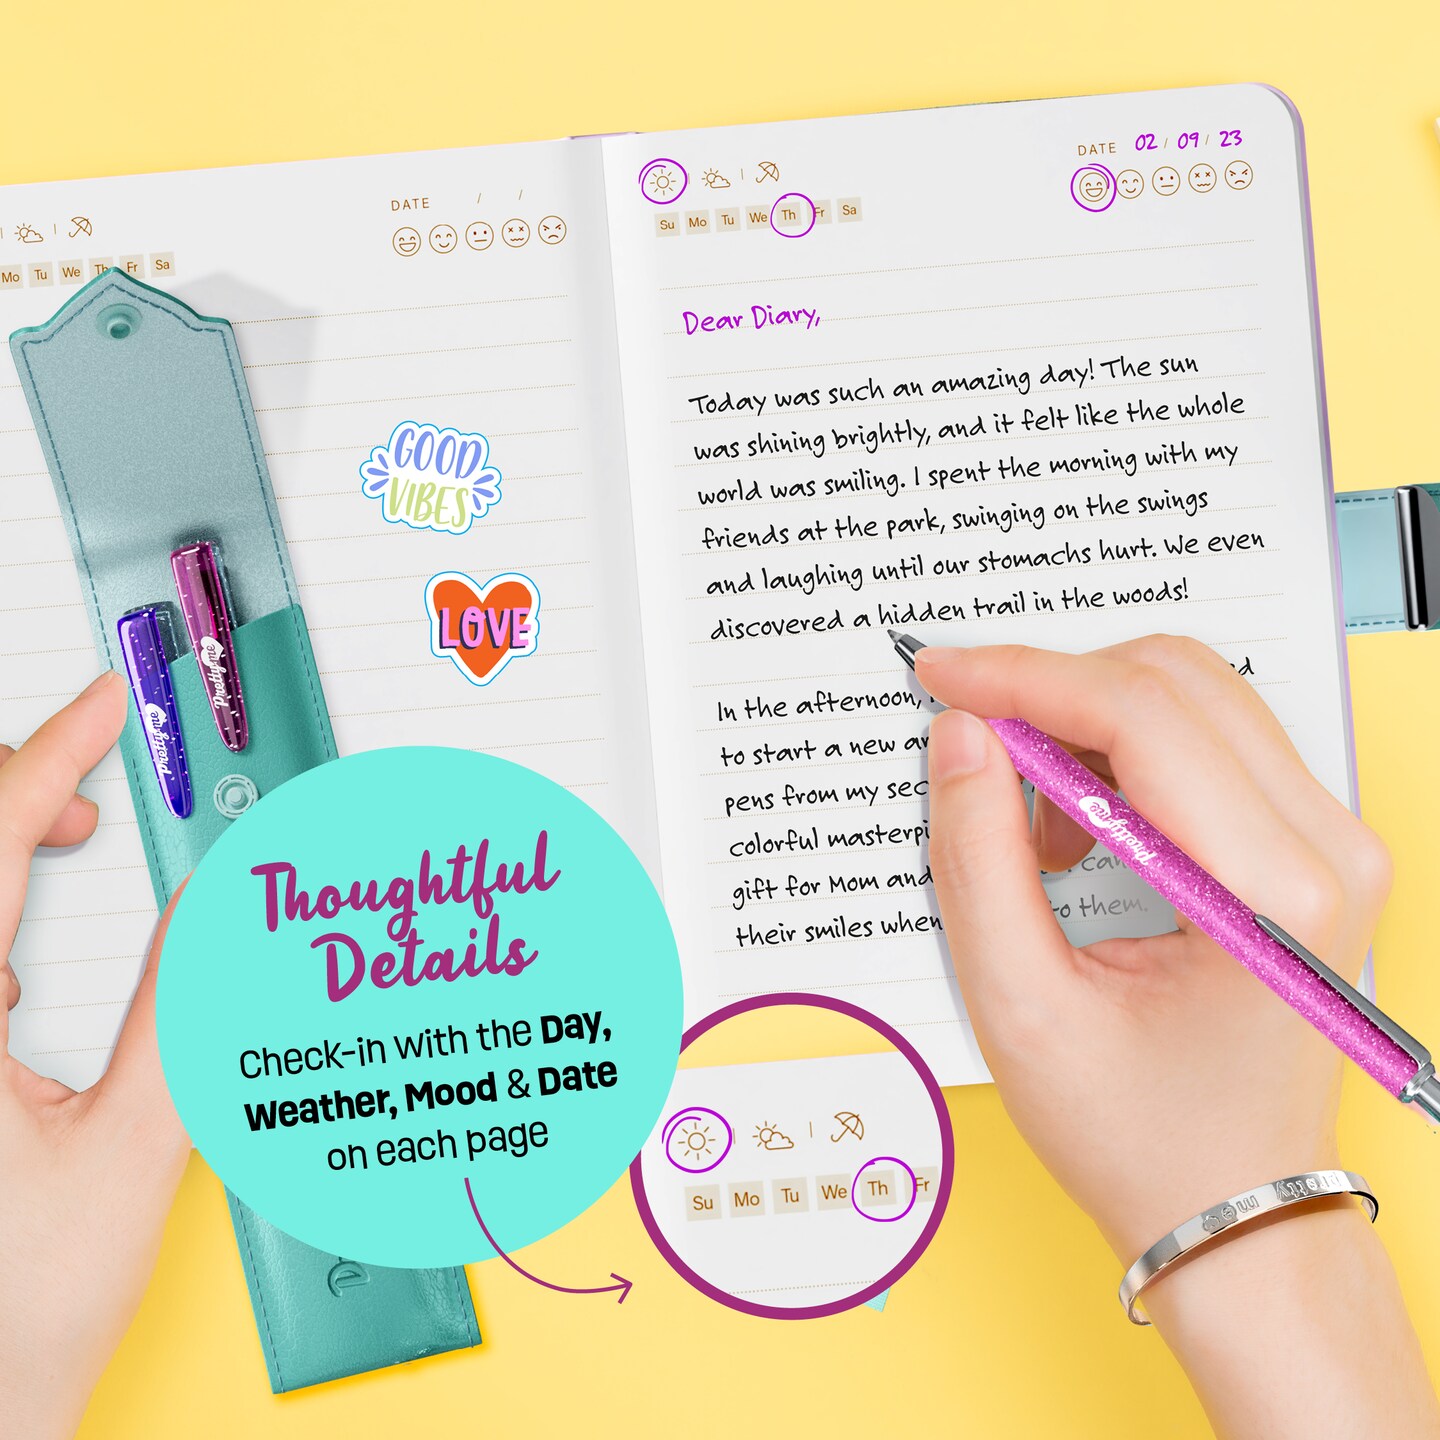 Secret Diary Set with Lock for Girls - Kids Locking Journal for Teens, Tweens - Birthday Gift Ideas for Girl Ages 8-12+ - Best Locked Journals Notebooks